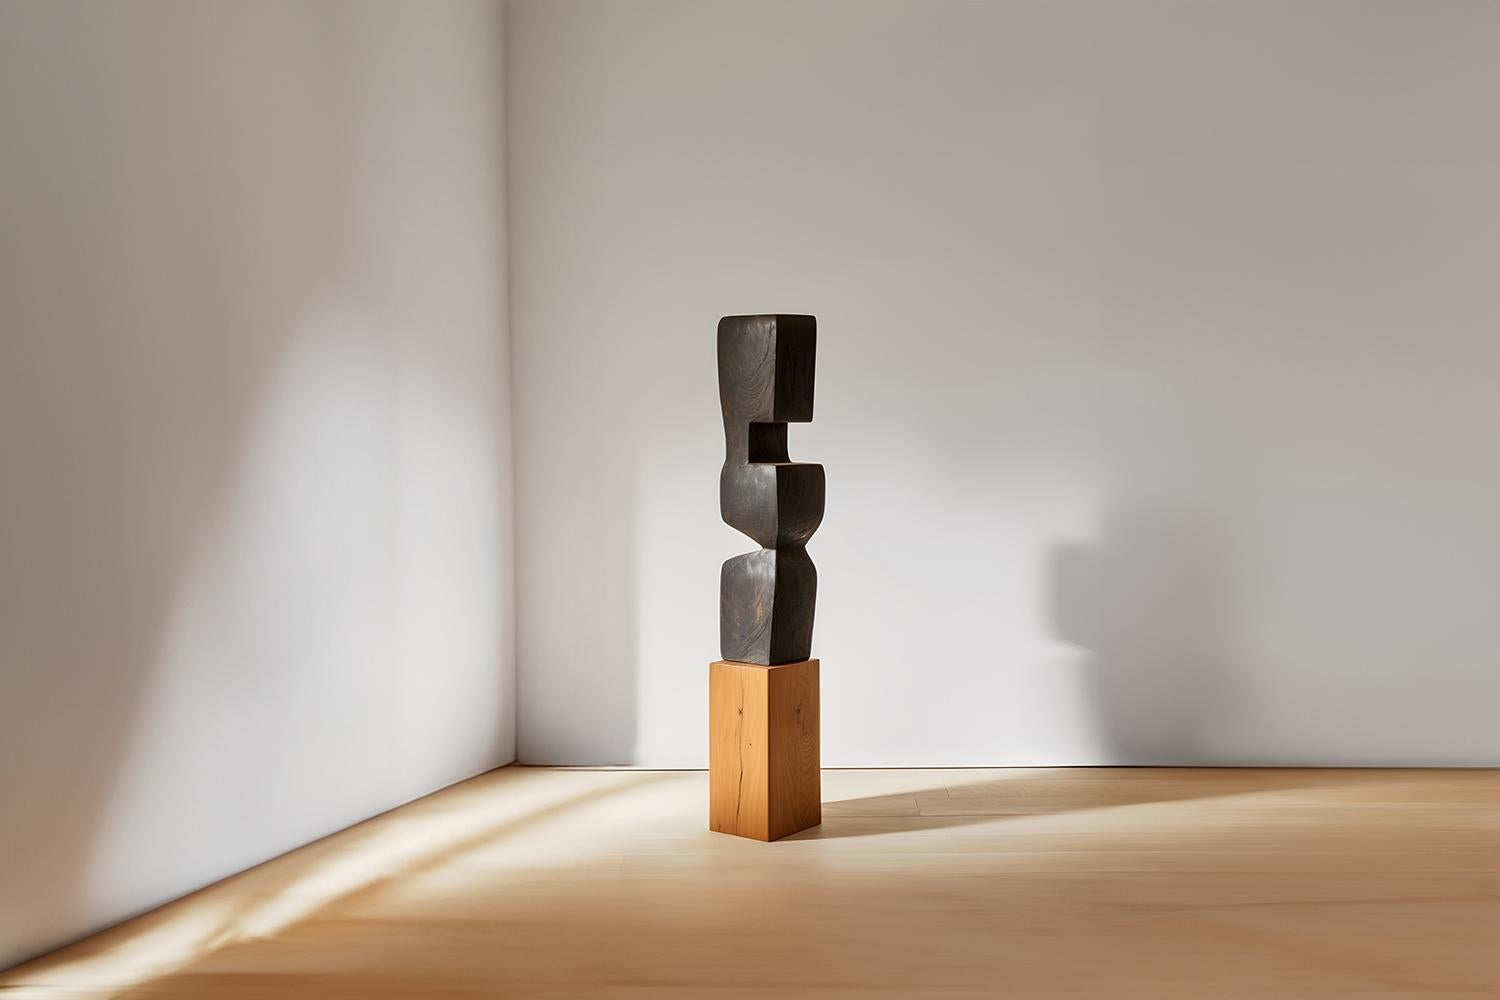 Abstract Modernist Free Form Wooden Sculpture in the style of Jean Arp, Unseen Force 12 by Joel Escalona



This monolithic sculpture, designed by the talented Artist Joel Escalona, is a towering example of beauty in craftsmanship. Hand and digital